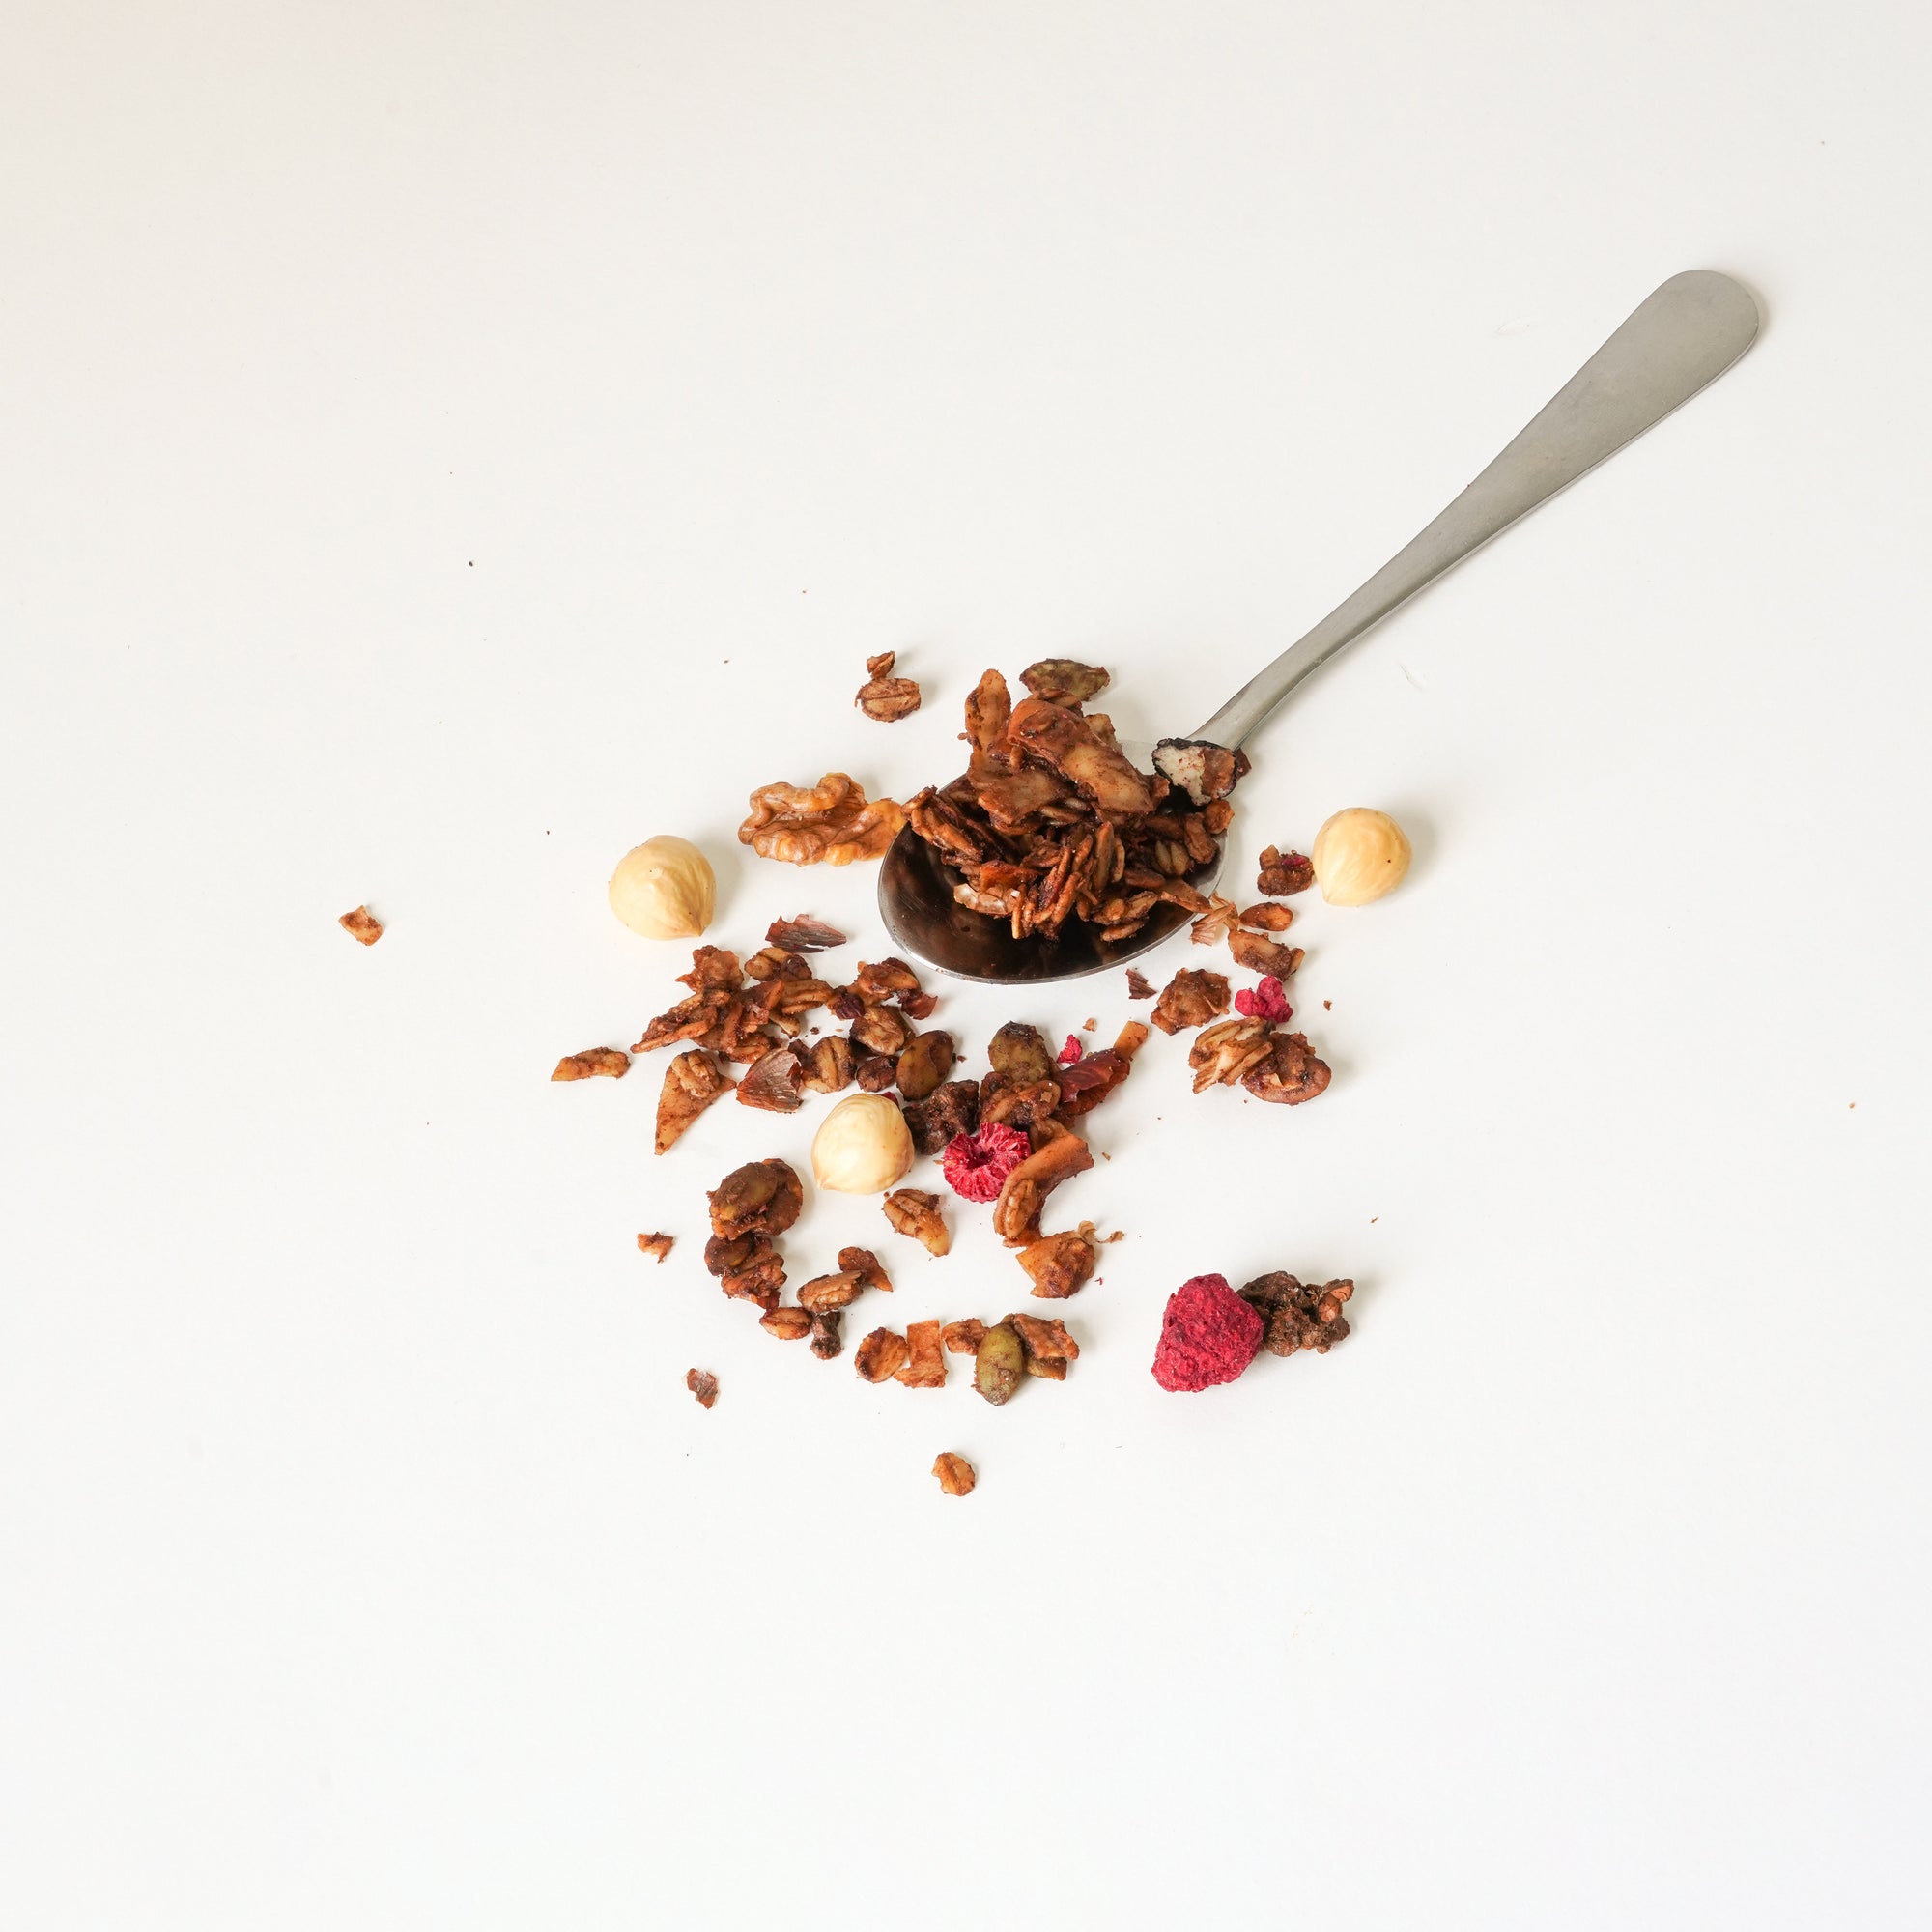 Image of muesli and a spoon unpackaged